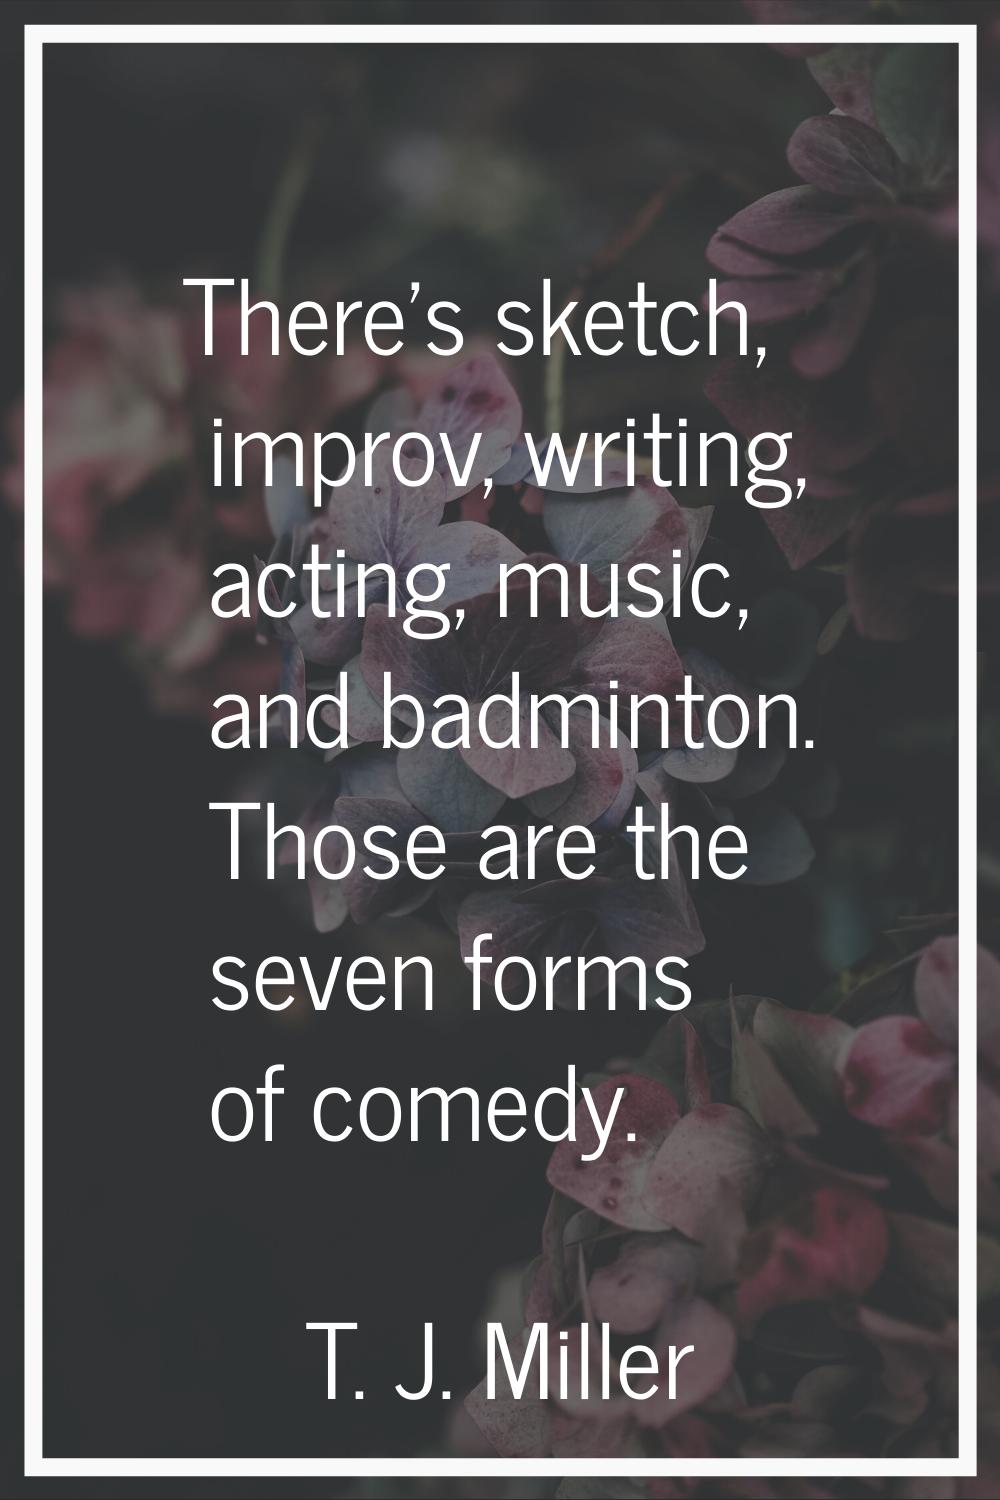 There's sketch, improv, writing, acting, music, and badminton. Those are the seven forms of comedy.